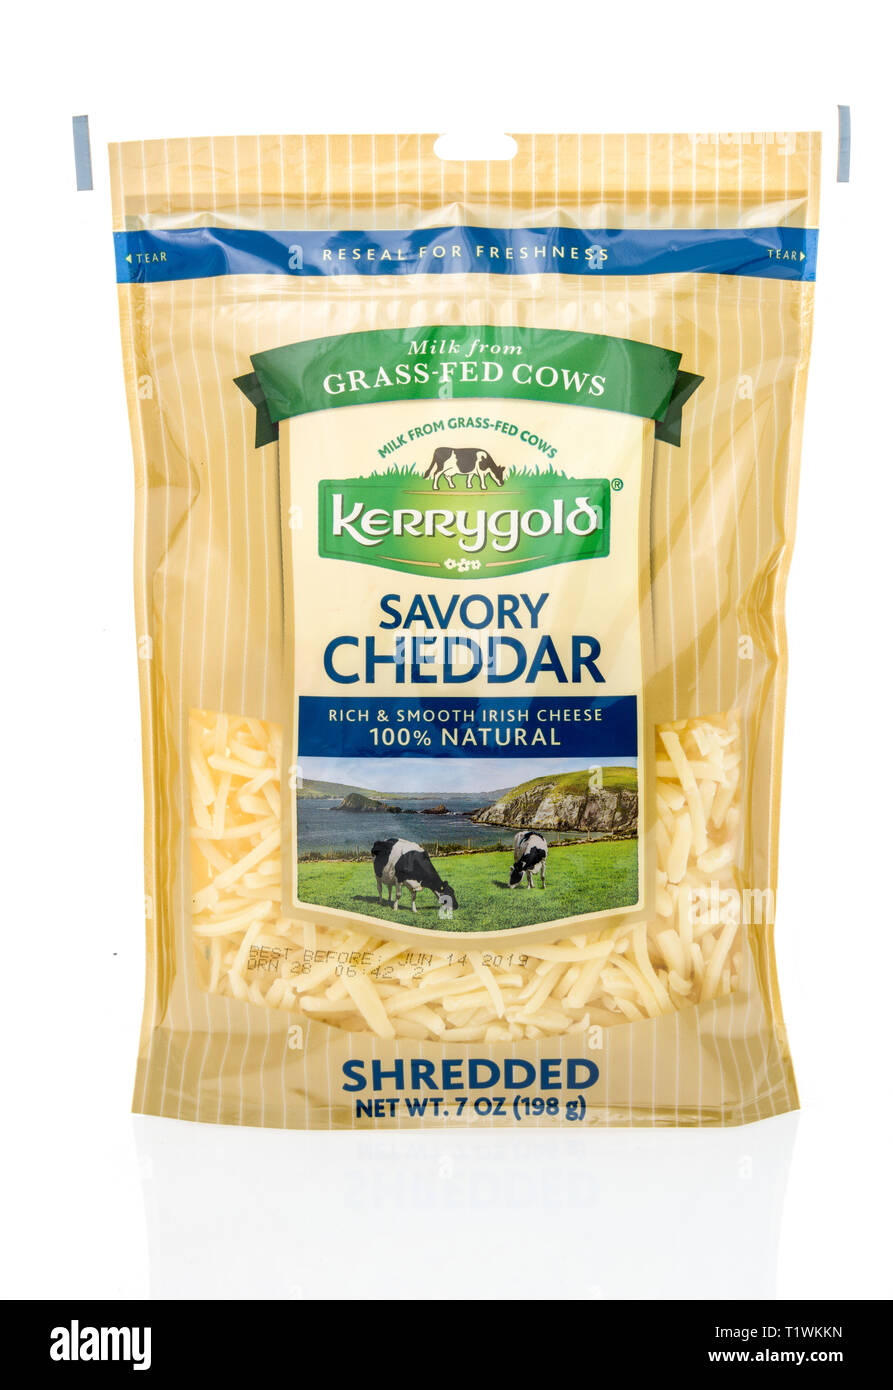 Winneconne, WI - 24 March 2019: A package of  Kerrygold savory cheddar milk from grass-fed cows shredded cheese on an isolated background Stock Photo